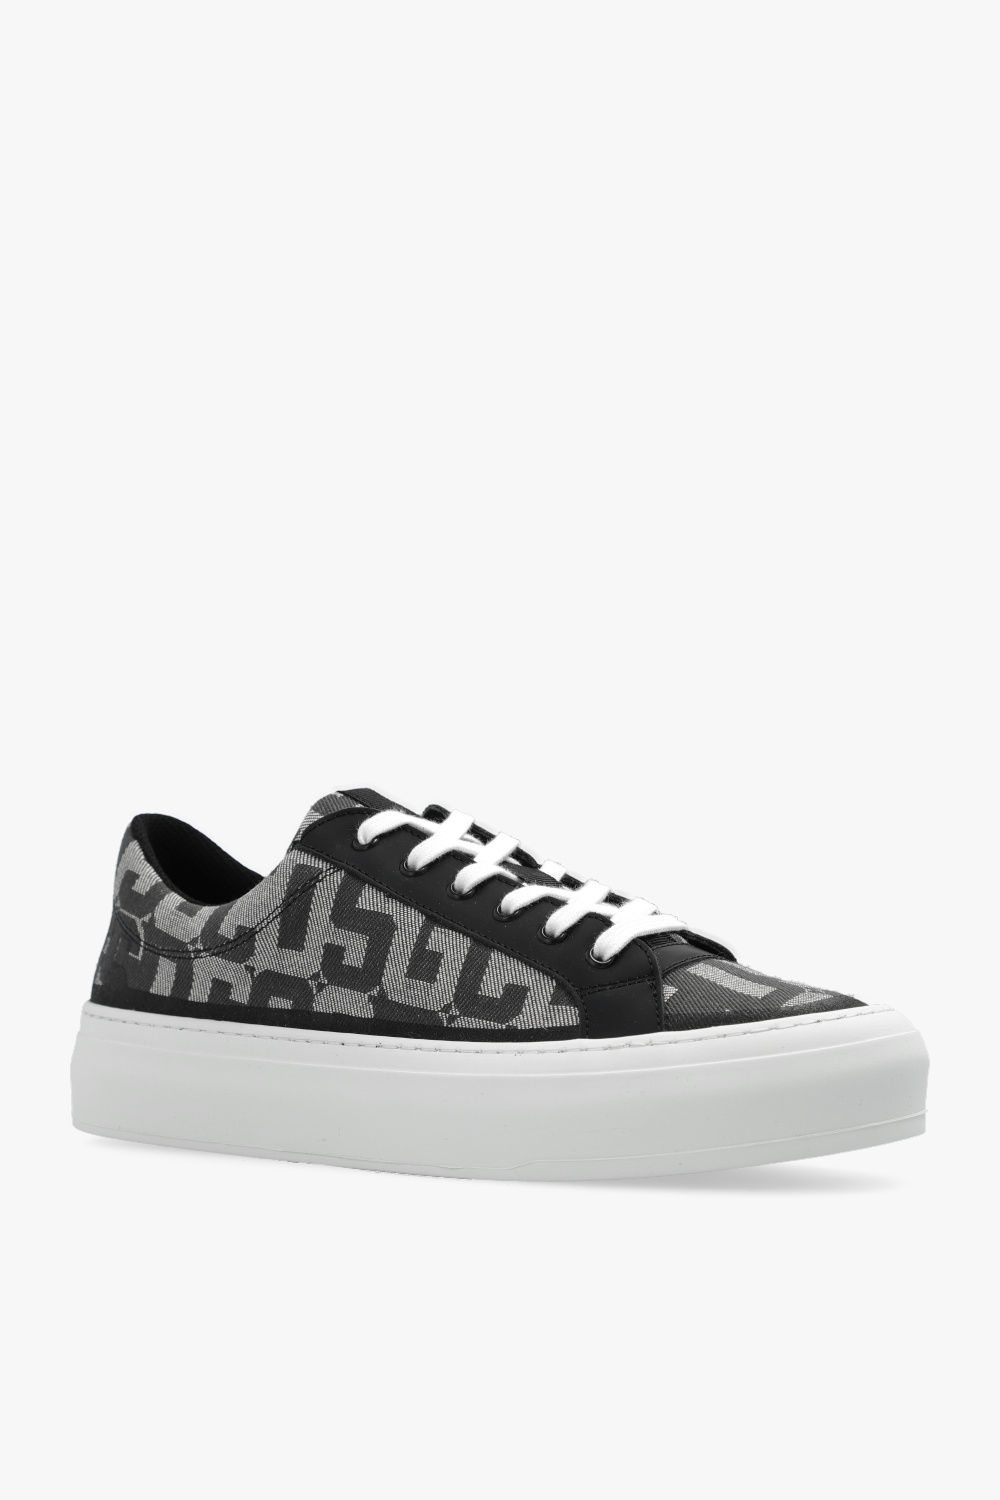 GCDS Sneakers with monogram